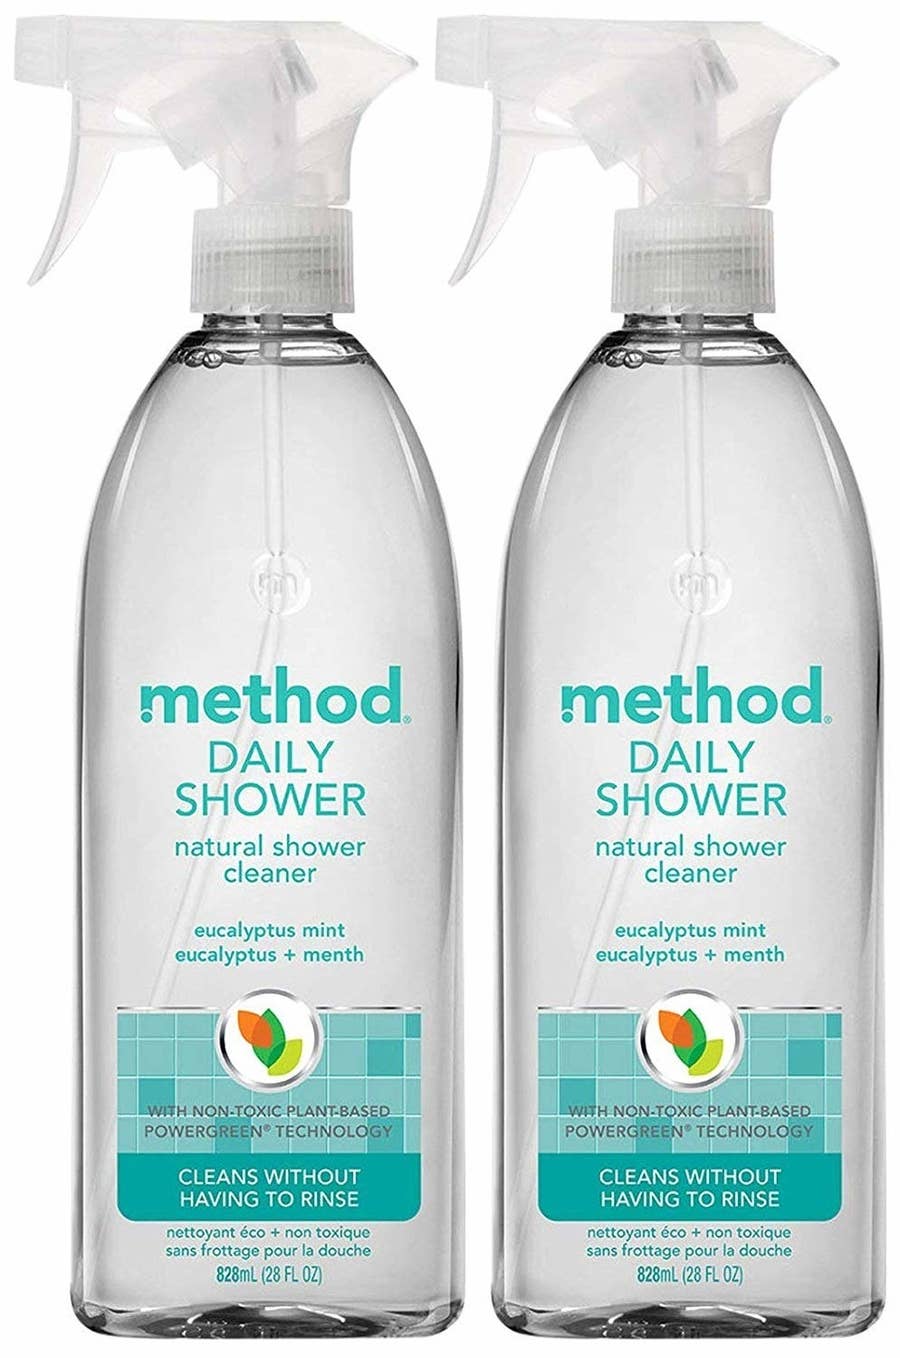 33 Products That Will Help You Speed Clean Your Home